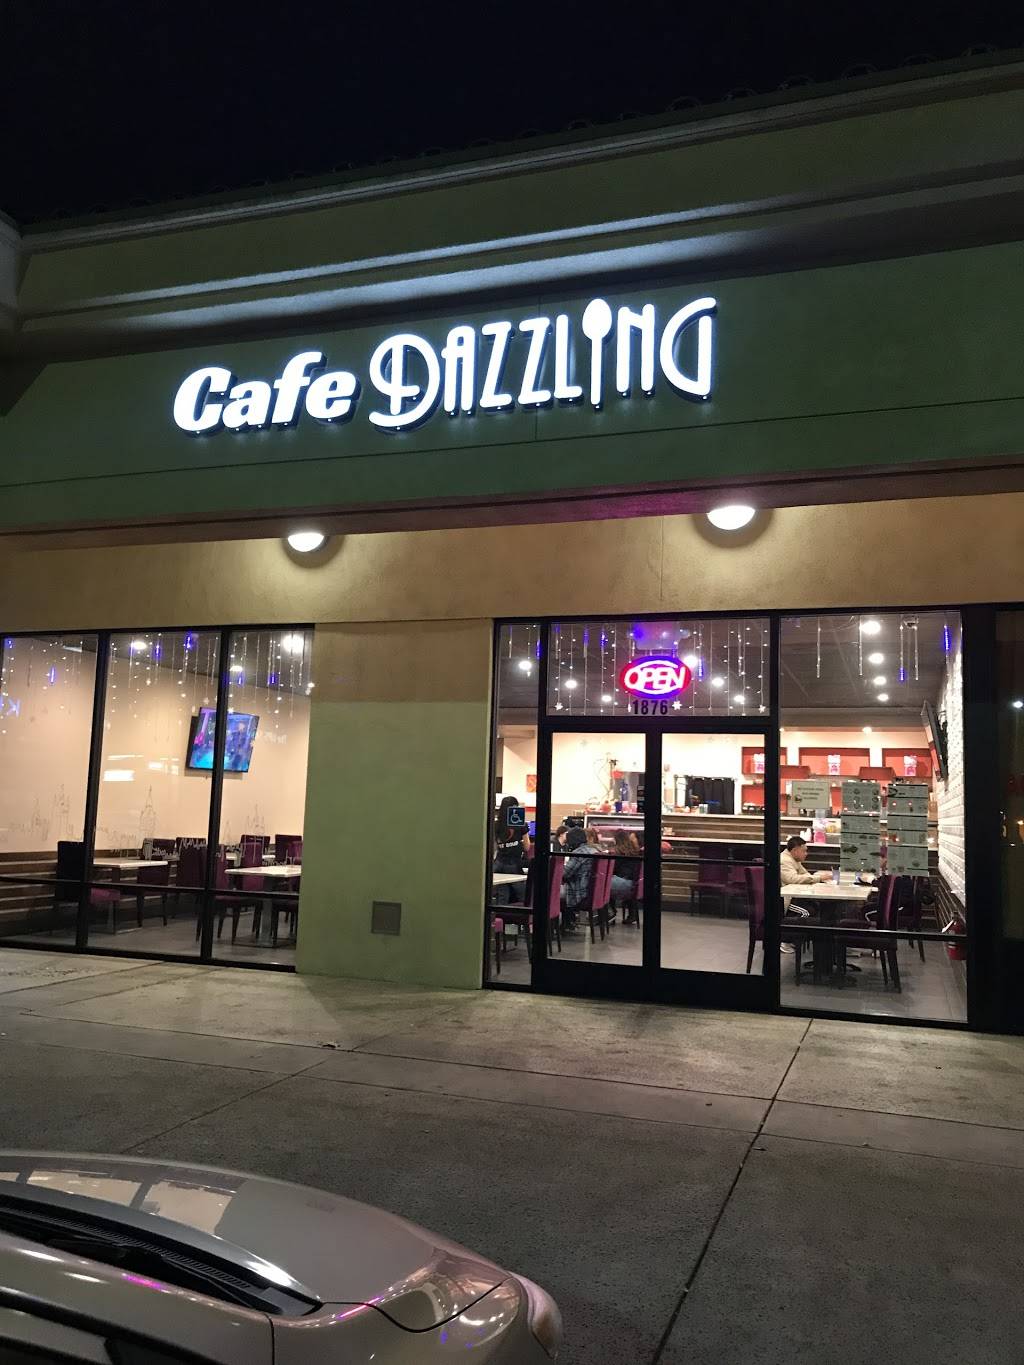 Cafe Dazzling | cafe | 1876 W 11th St, Tracy, CA 95376, USA | 2097404542 OR +1 209-740-4542